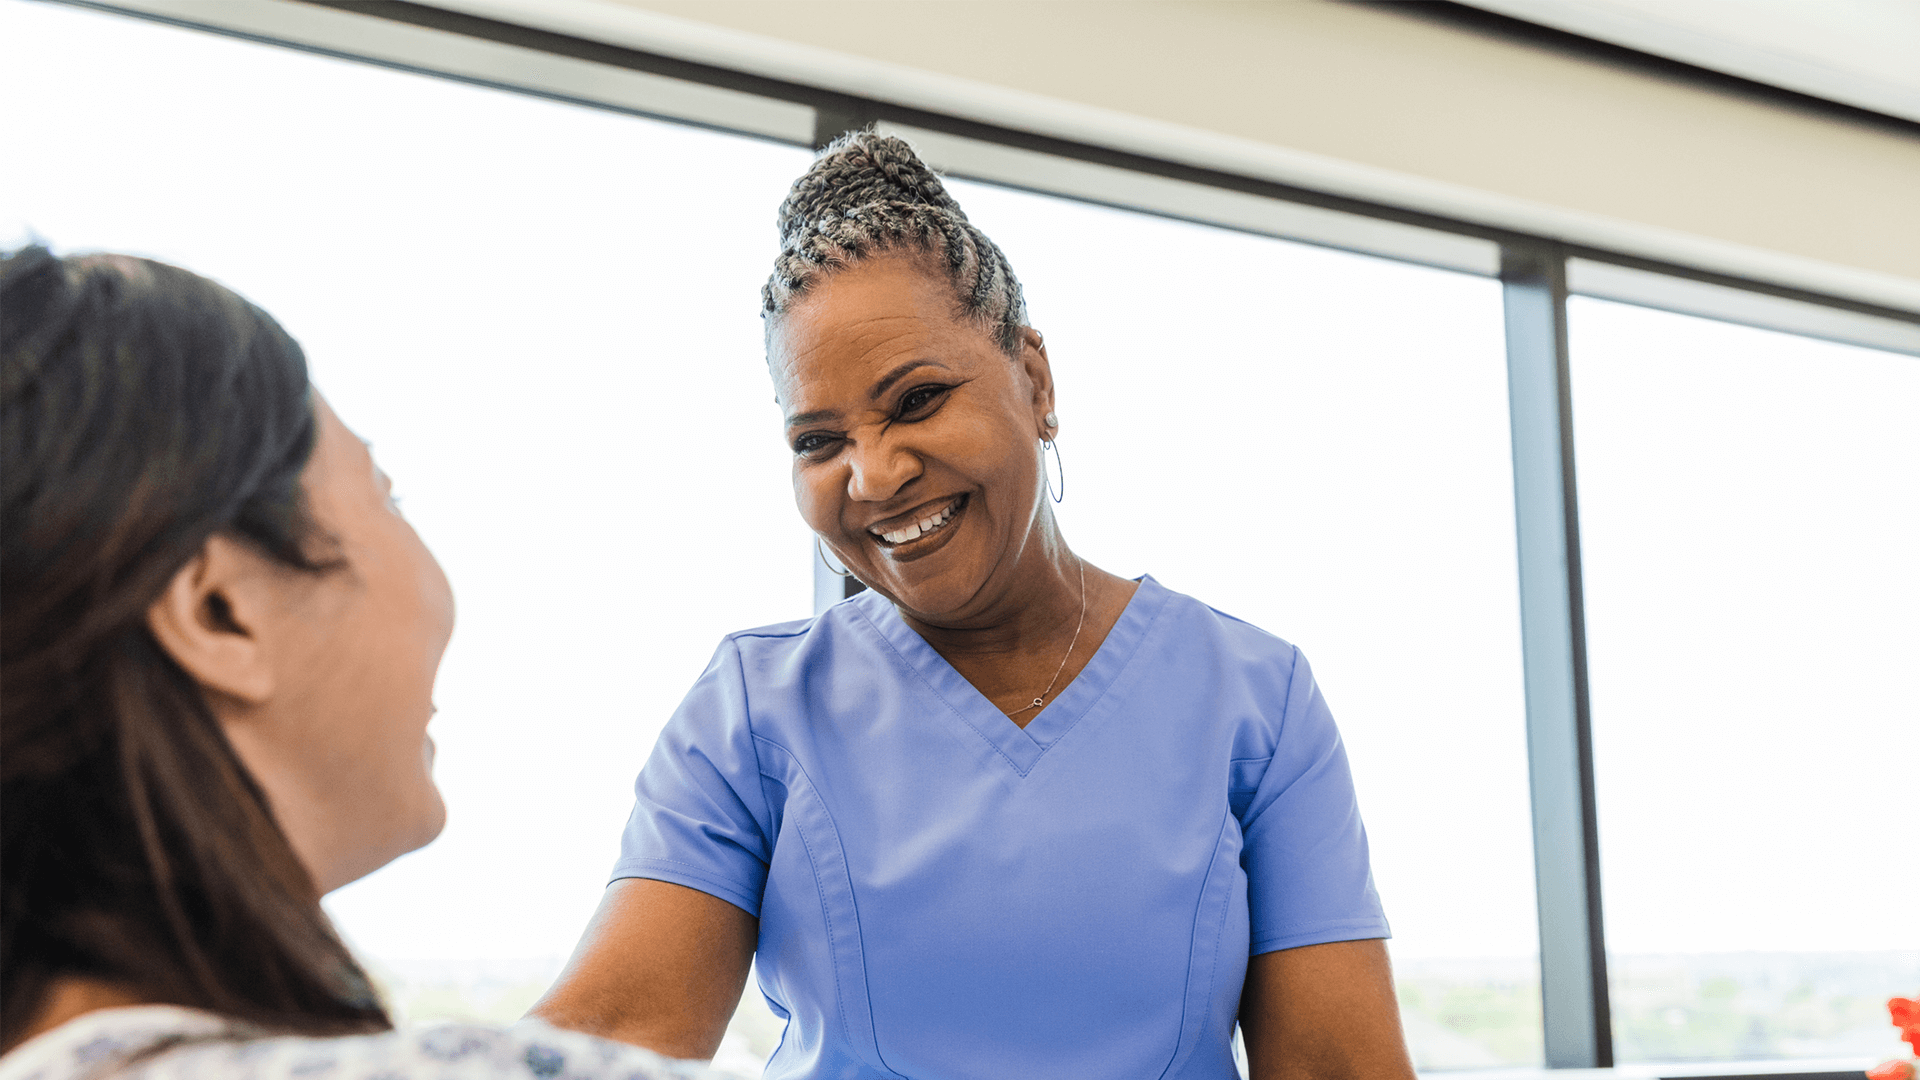 Nurse practitioner looks at patient with a smile